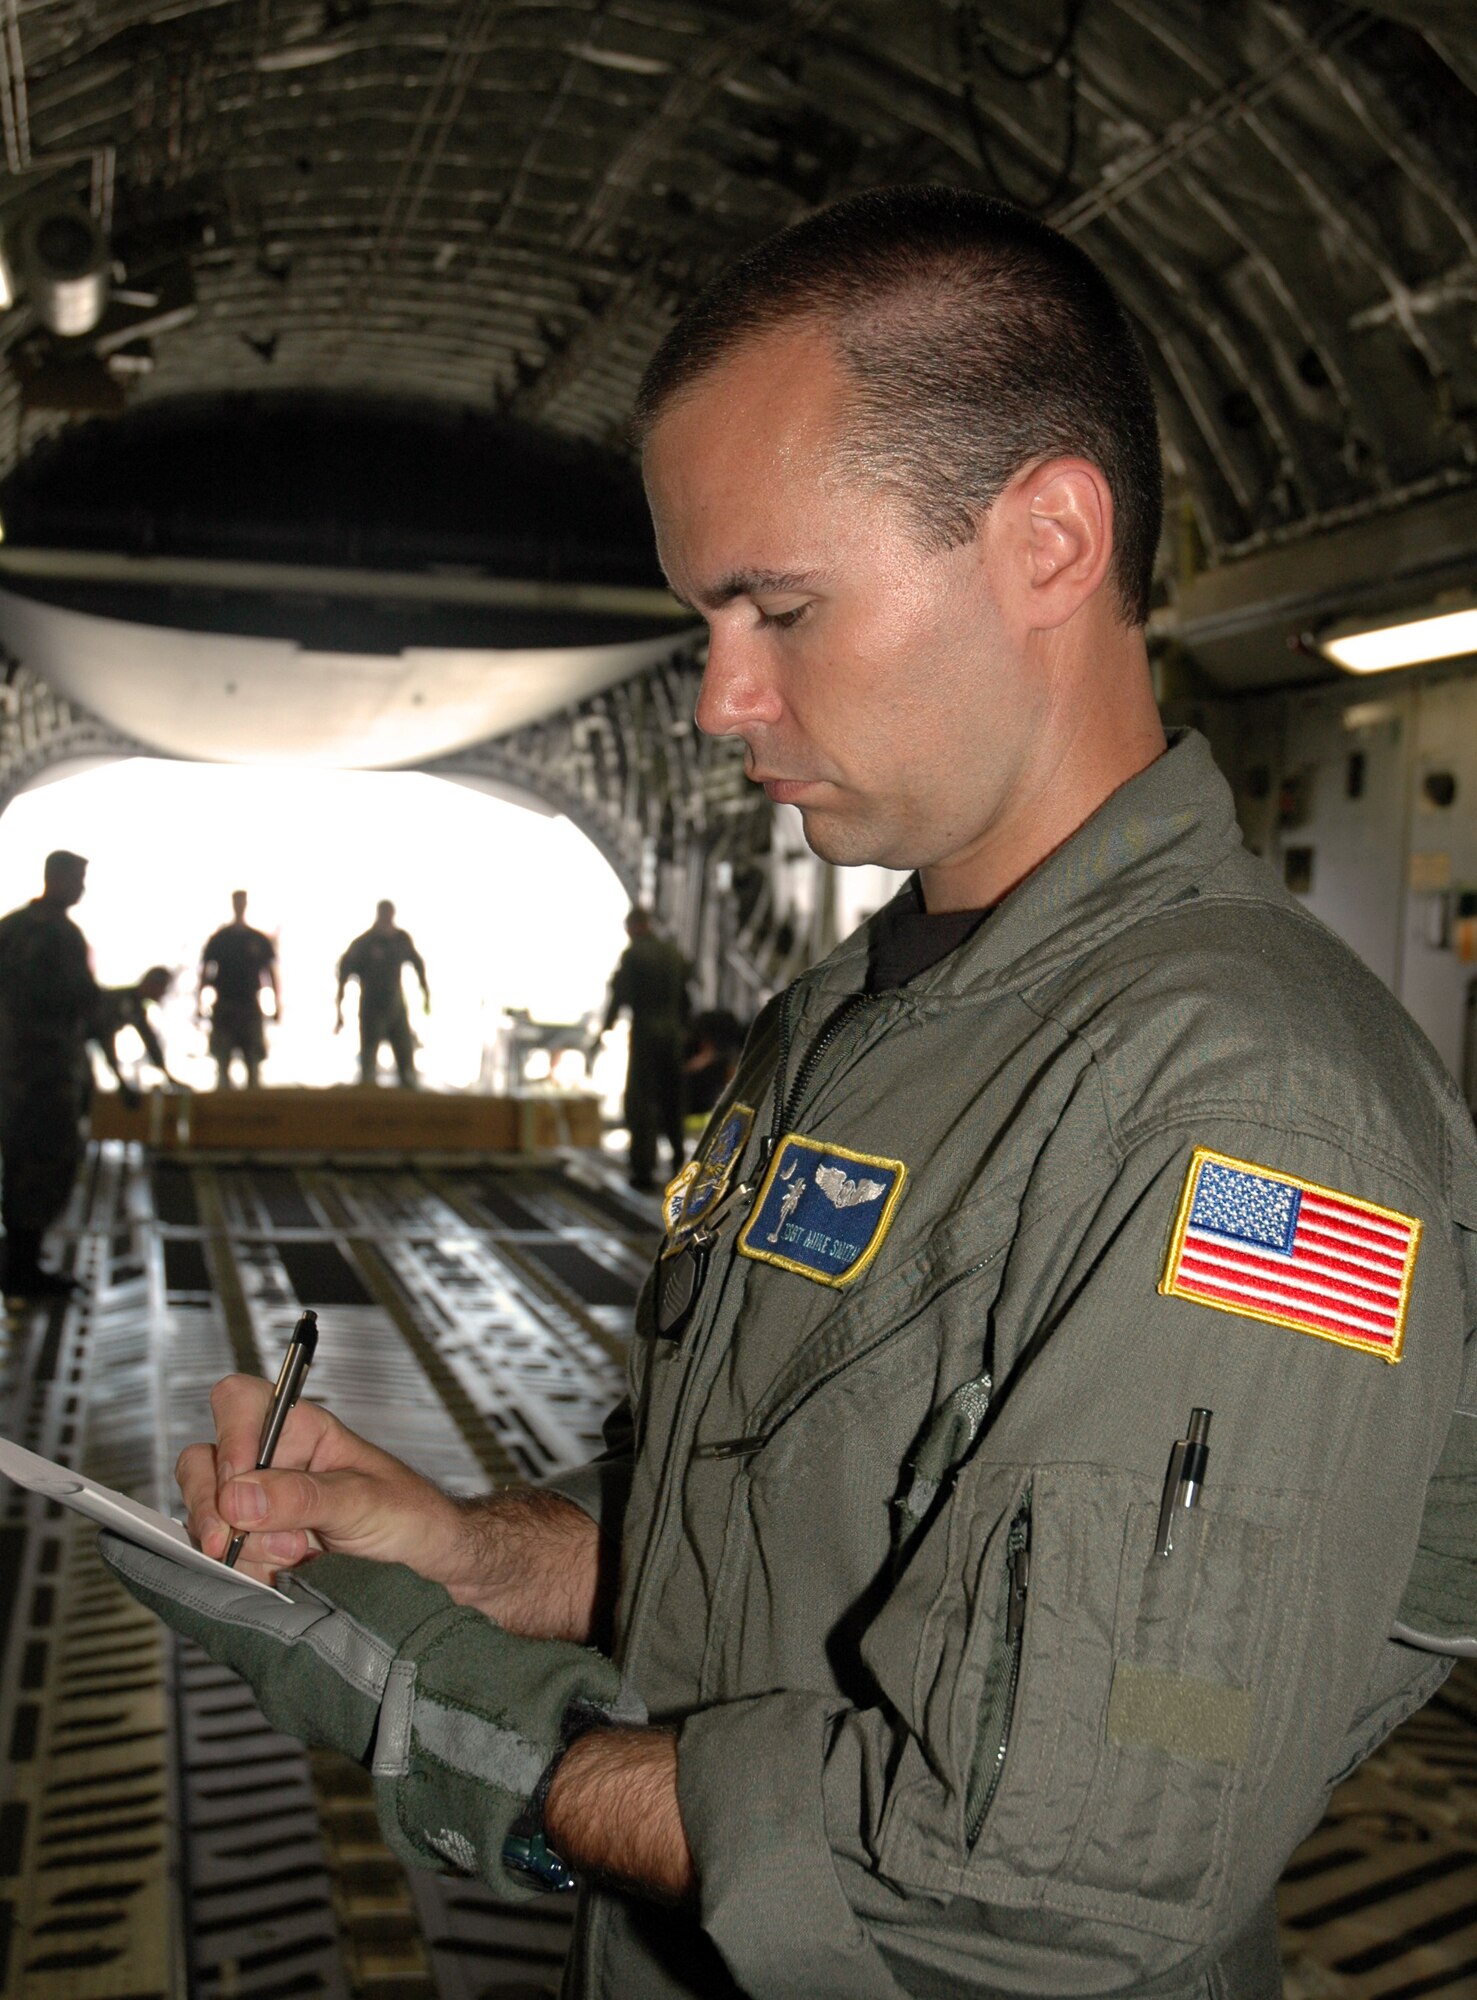 Tech. Sgt. Mike Smith, a reserve loadmaster with the 300th Airlift Squadron, Charleston AFB, S.C., checks cargo specifications aboard a C-17 Globemaster III, during a recent training mission.  (Photo by 1st Lt. Wayne Capps, USAFR)